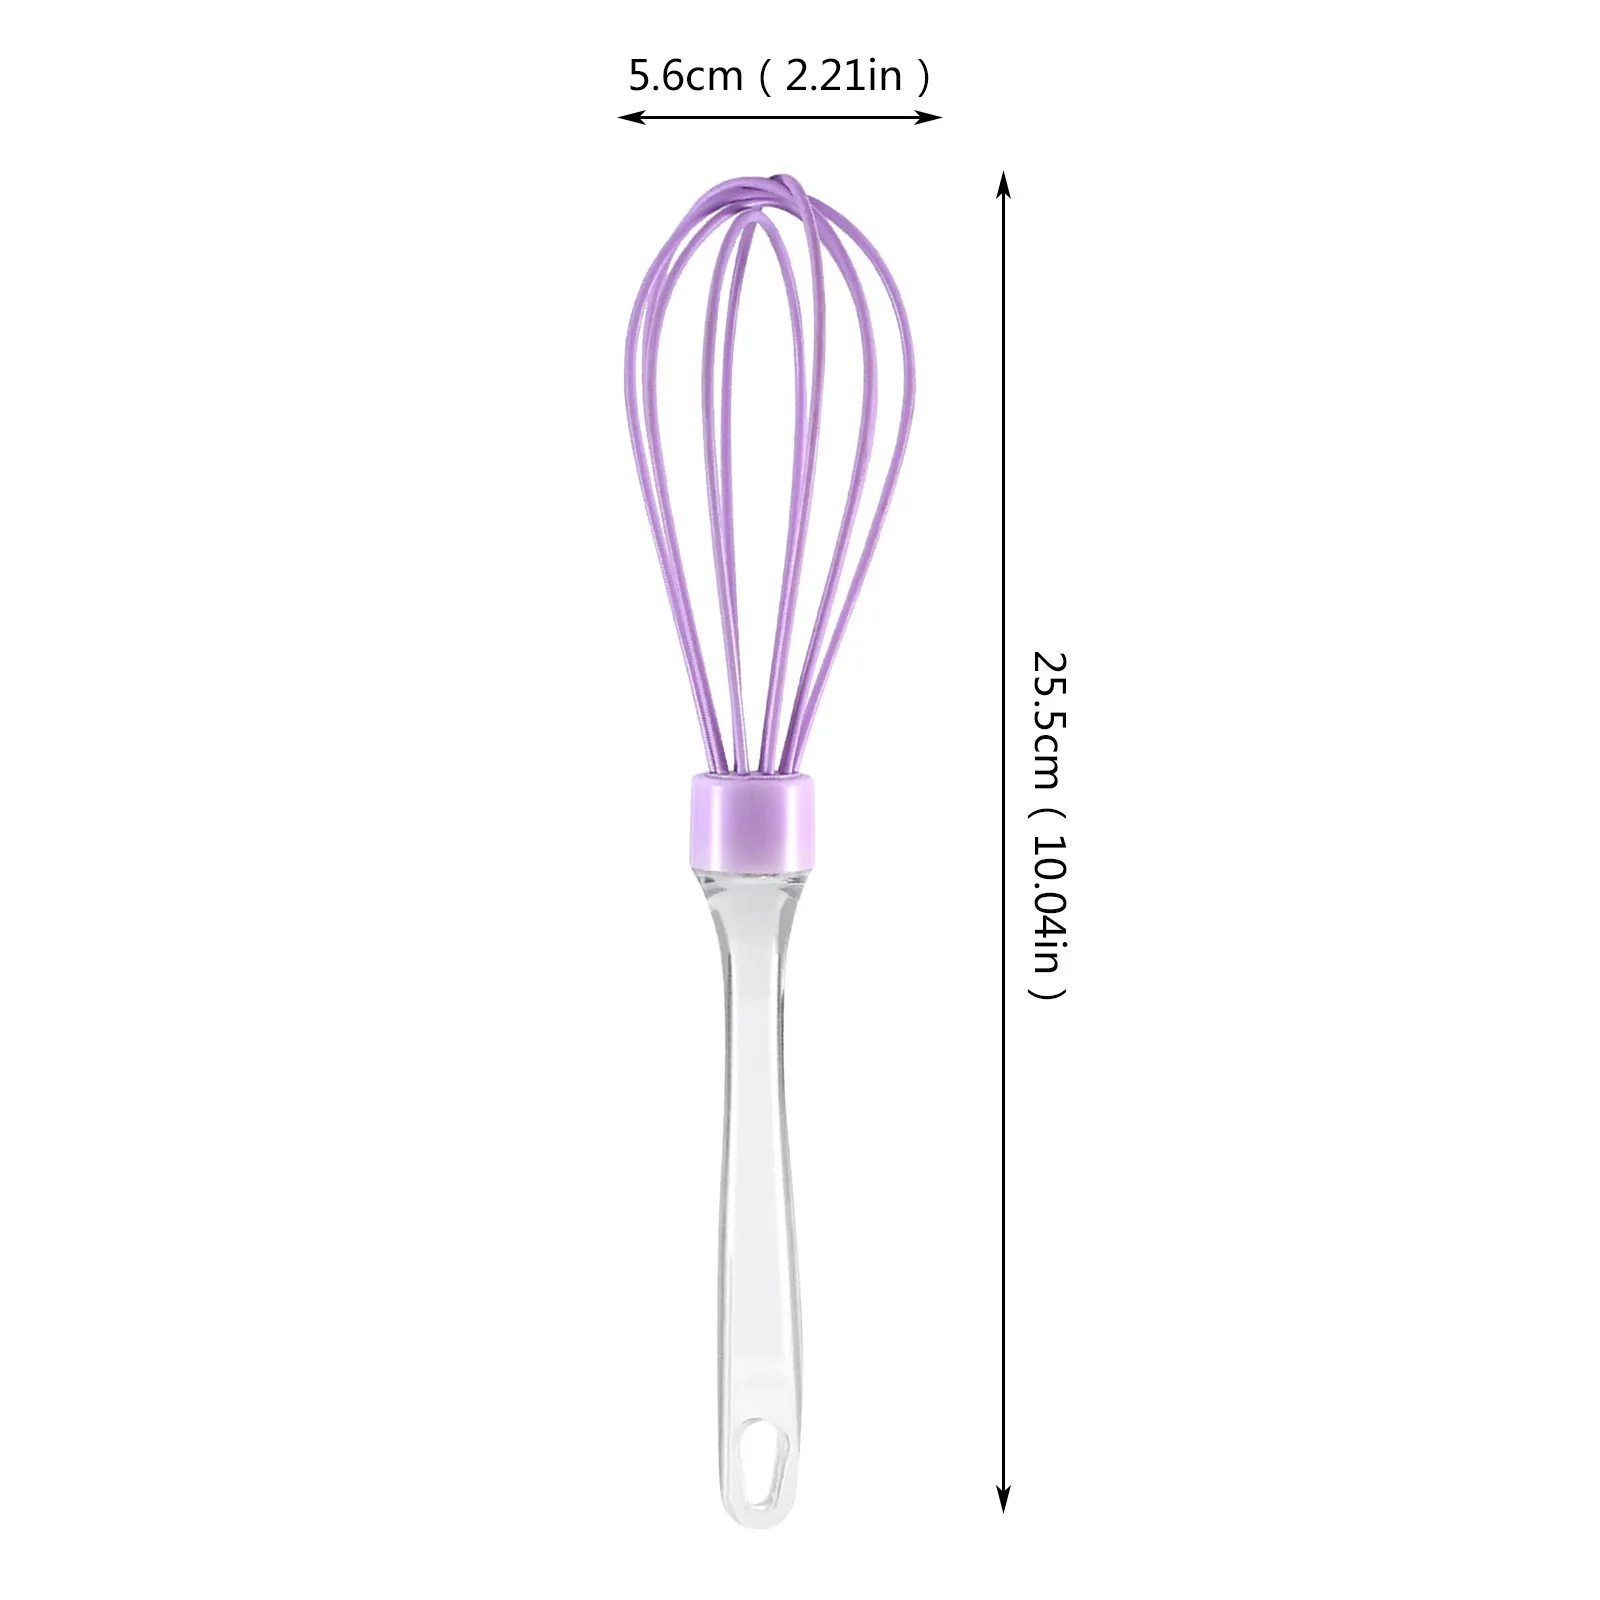 Silicone Egg Beaters Drink Whisk Mixer Egg Beater Multifunctional Manual  Egg Beater Kitchen Cook Gadgets Egg Whisk Bake Tools - AliExpress